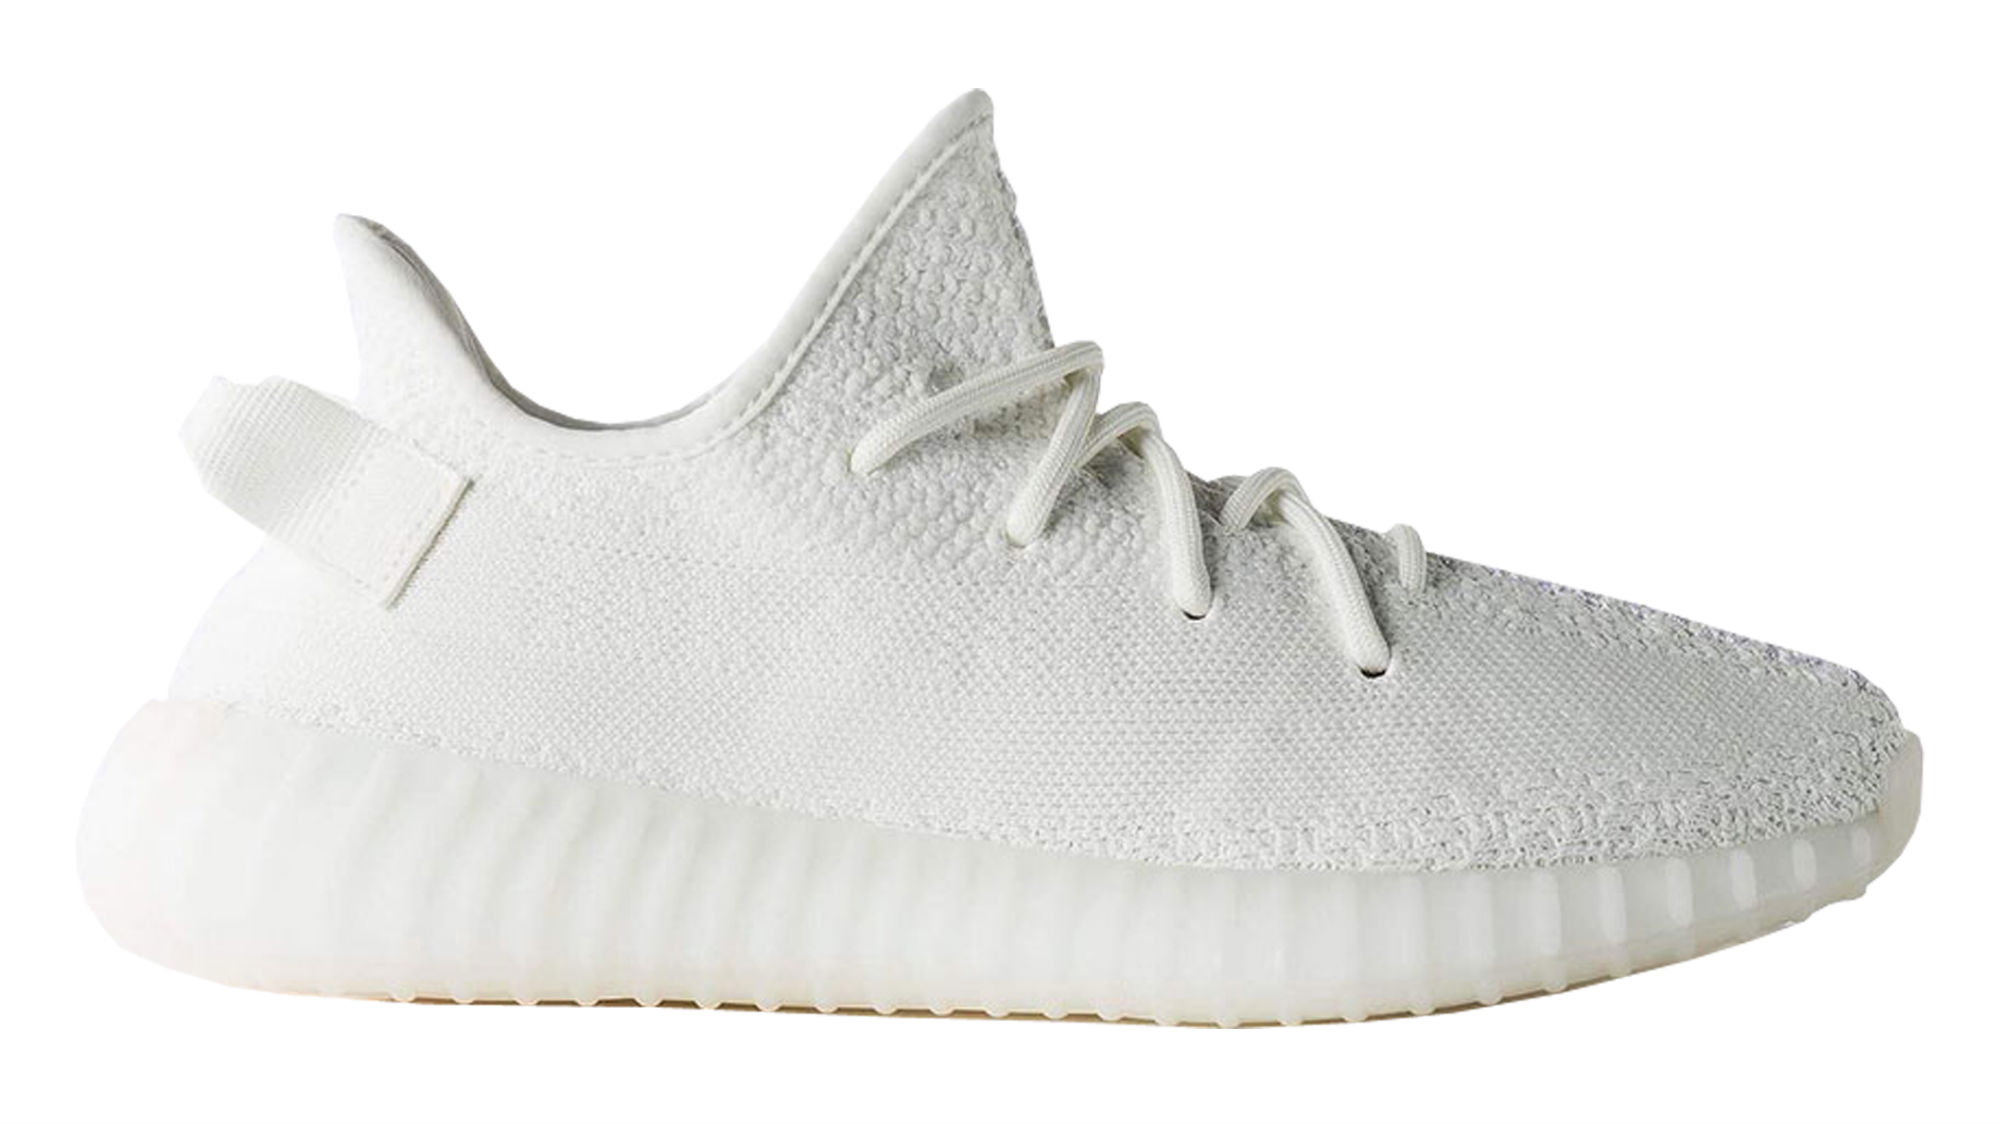 Formular Nathaniel Ward proyector Adidas Yeezy Boost 350 V2 "Triple White" | Adidas | Release Dates, Sneaker  Calendar, Prices & Collaborations